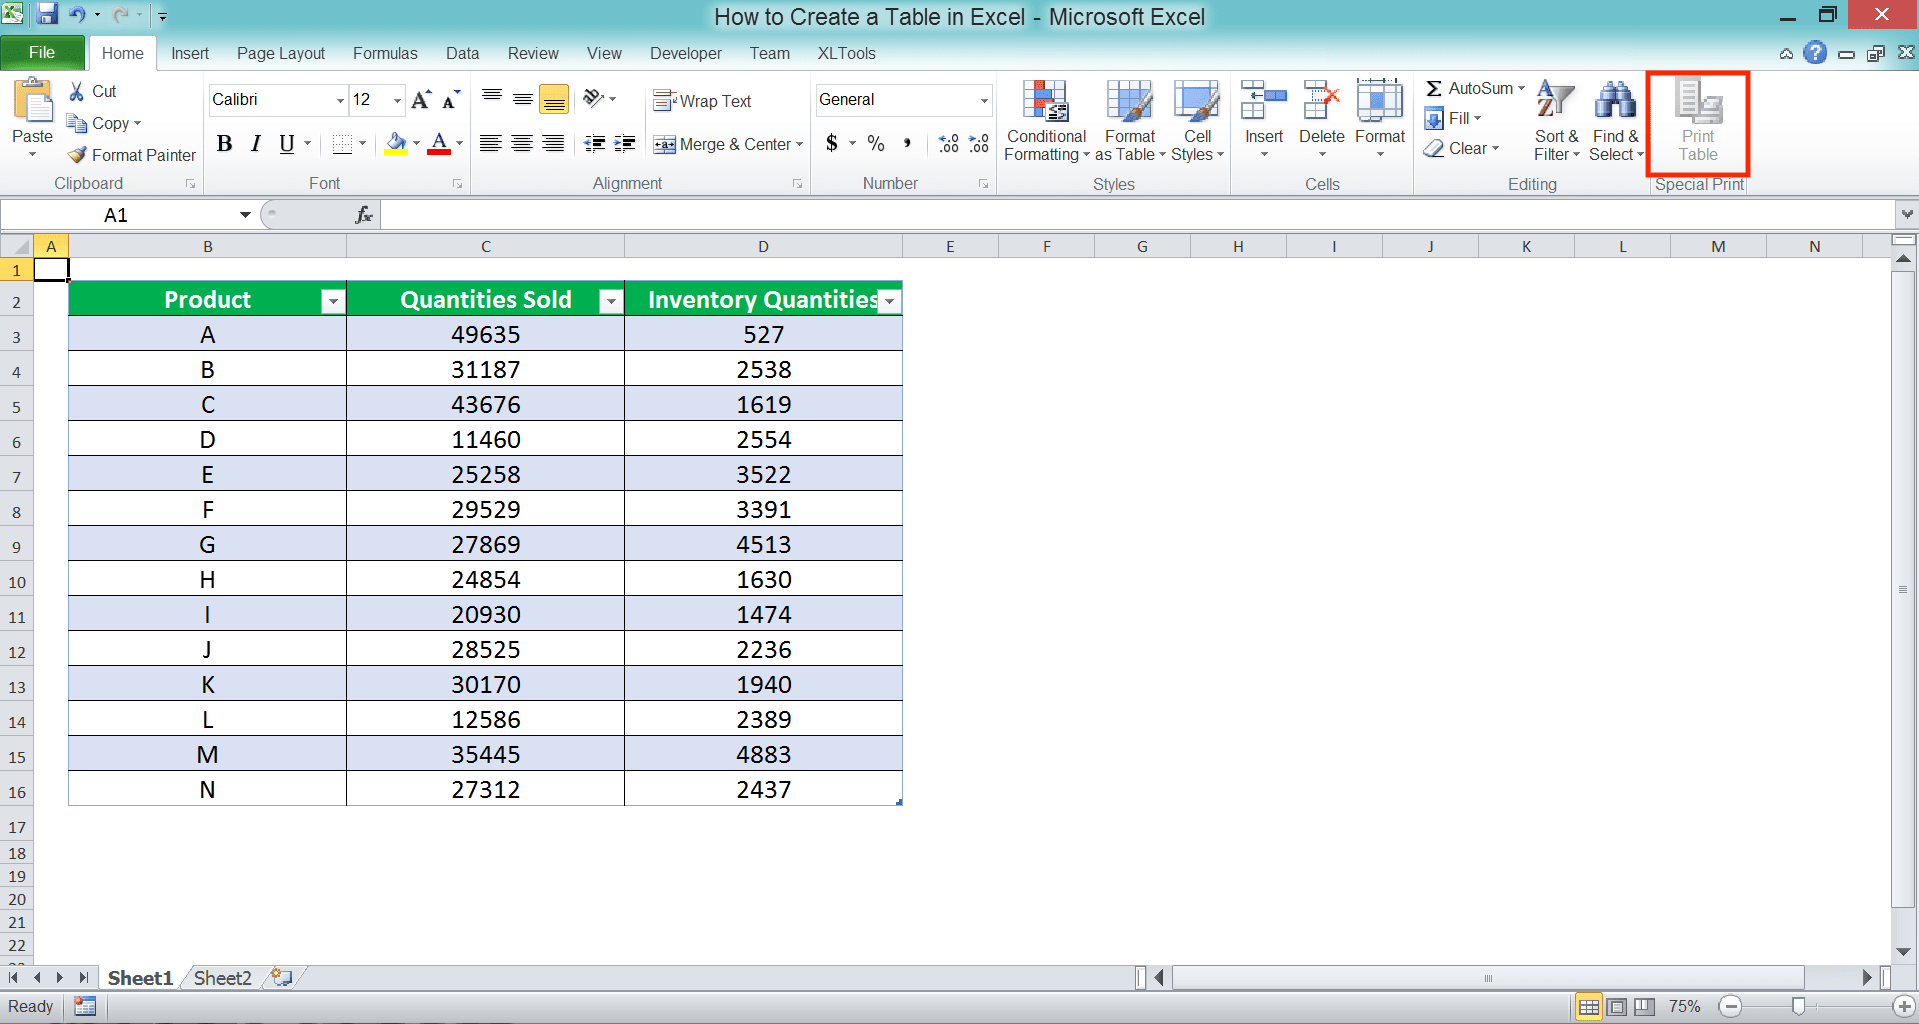 How to Make a Table in Excel - Screenshot of the Print List Button Location